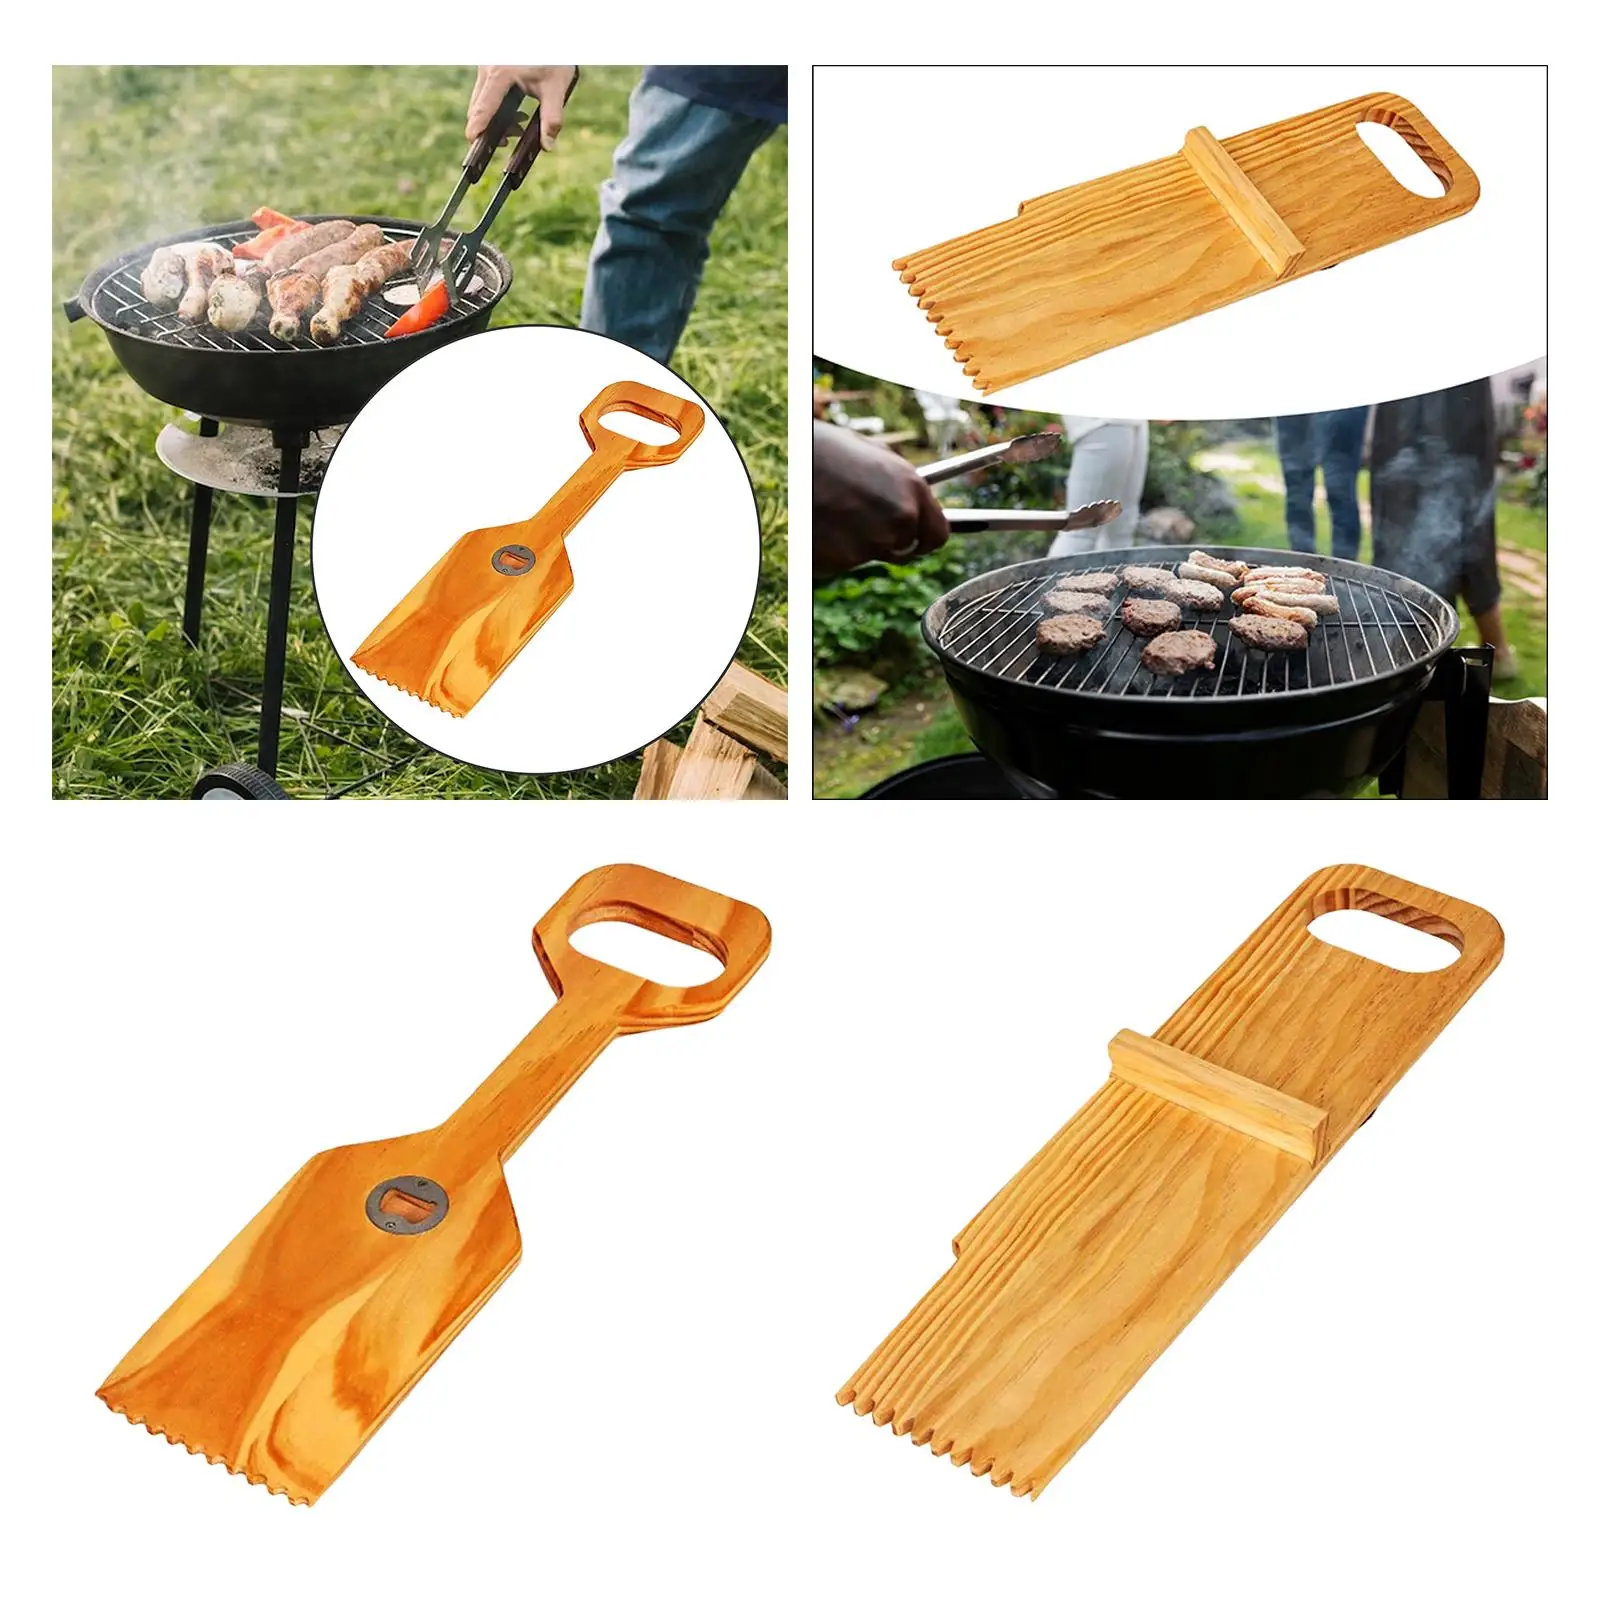 Wood Griddle Spatula Flat Kitchen Accessories Heat Resistant Multifunctional Outdoor Grill Utensils for Turning Serving Frying